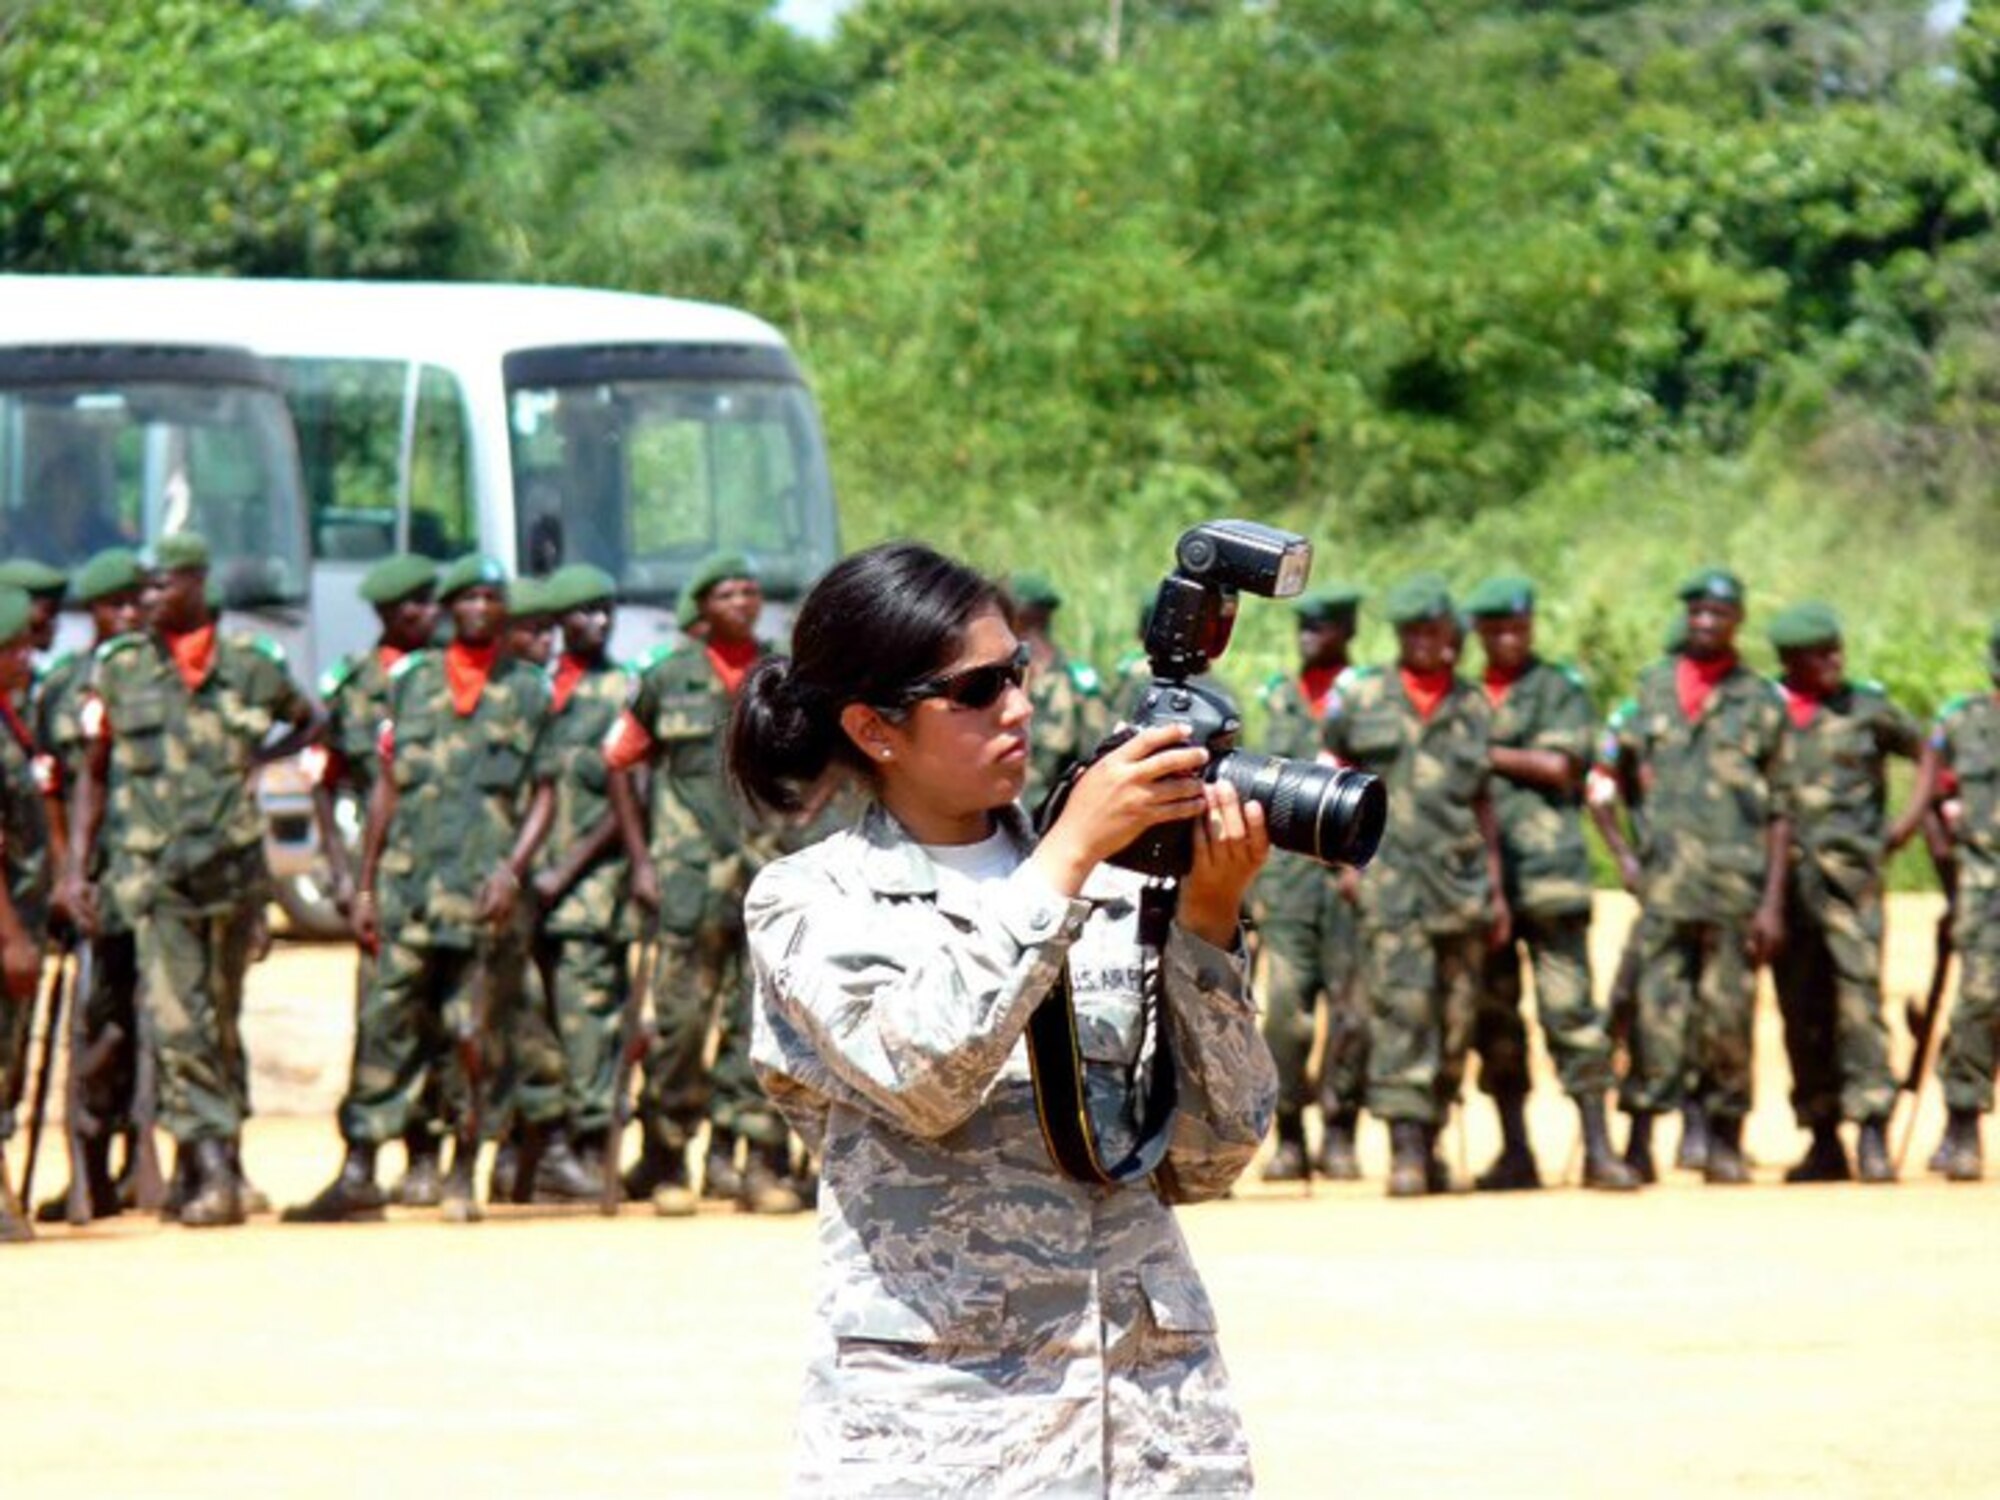 Senior Airman Christine Fink takes photos during her deployment to Africa in 2010. Fink is a member of the Comanche tribe. (Courtesy Photo)